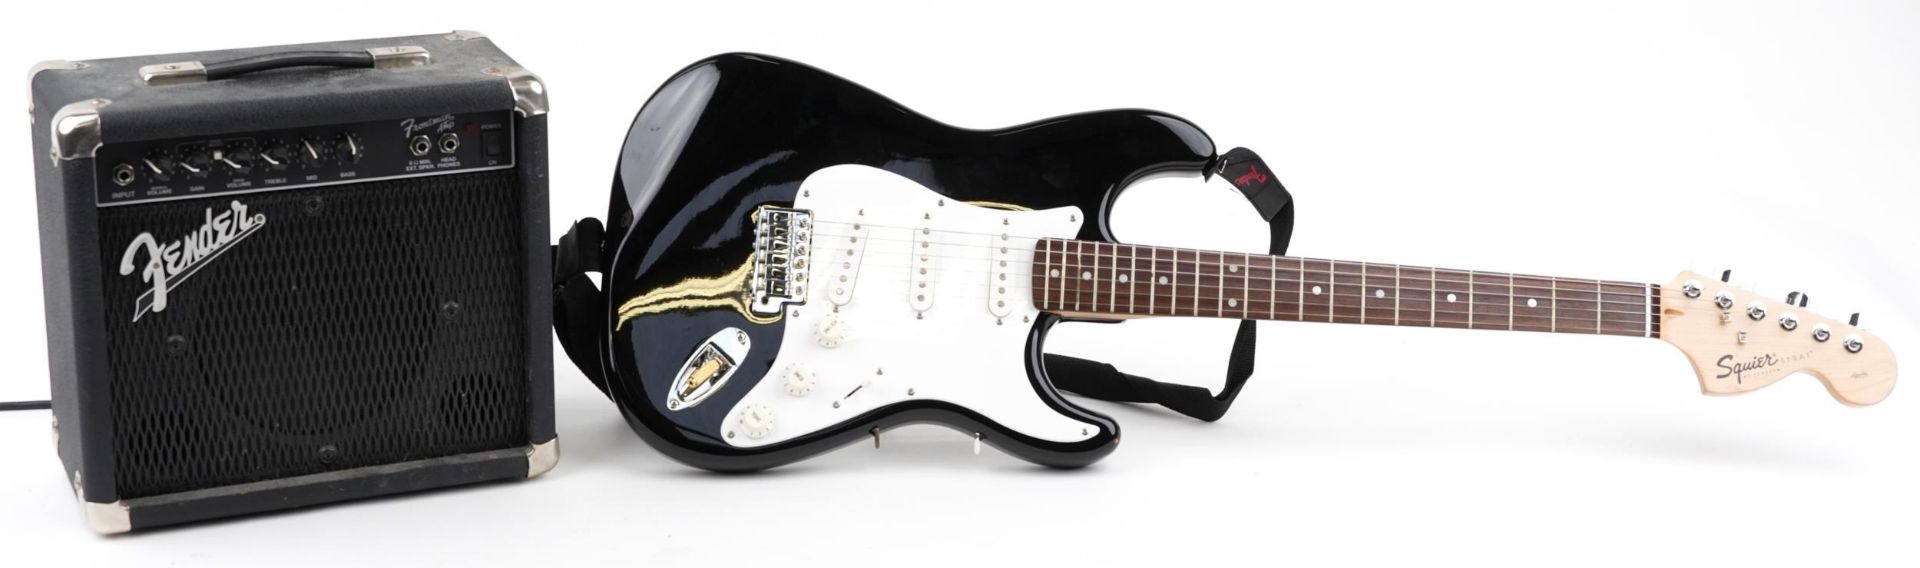 Squire Strat by Fender six string electric guitar with Fender Front Man amp and protective travel